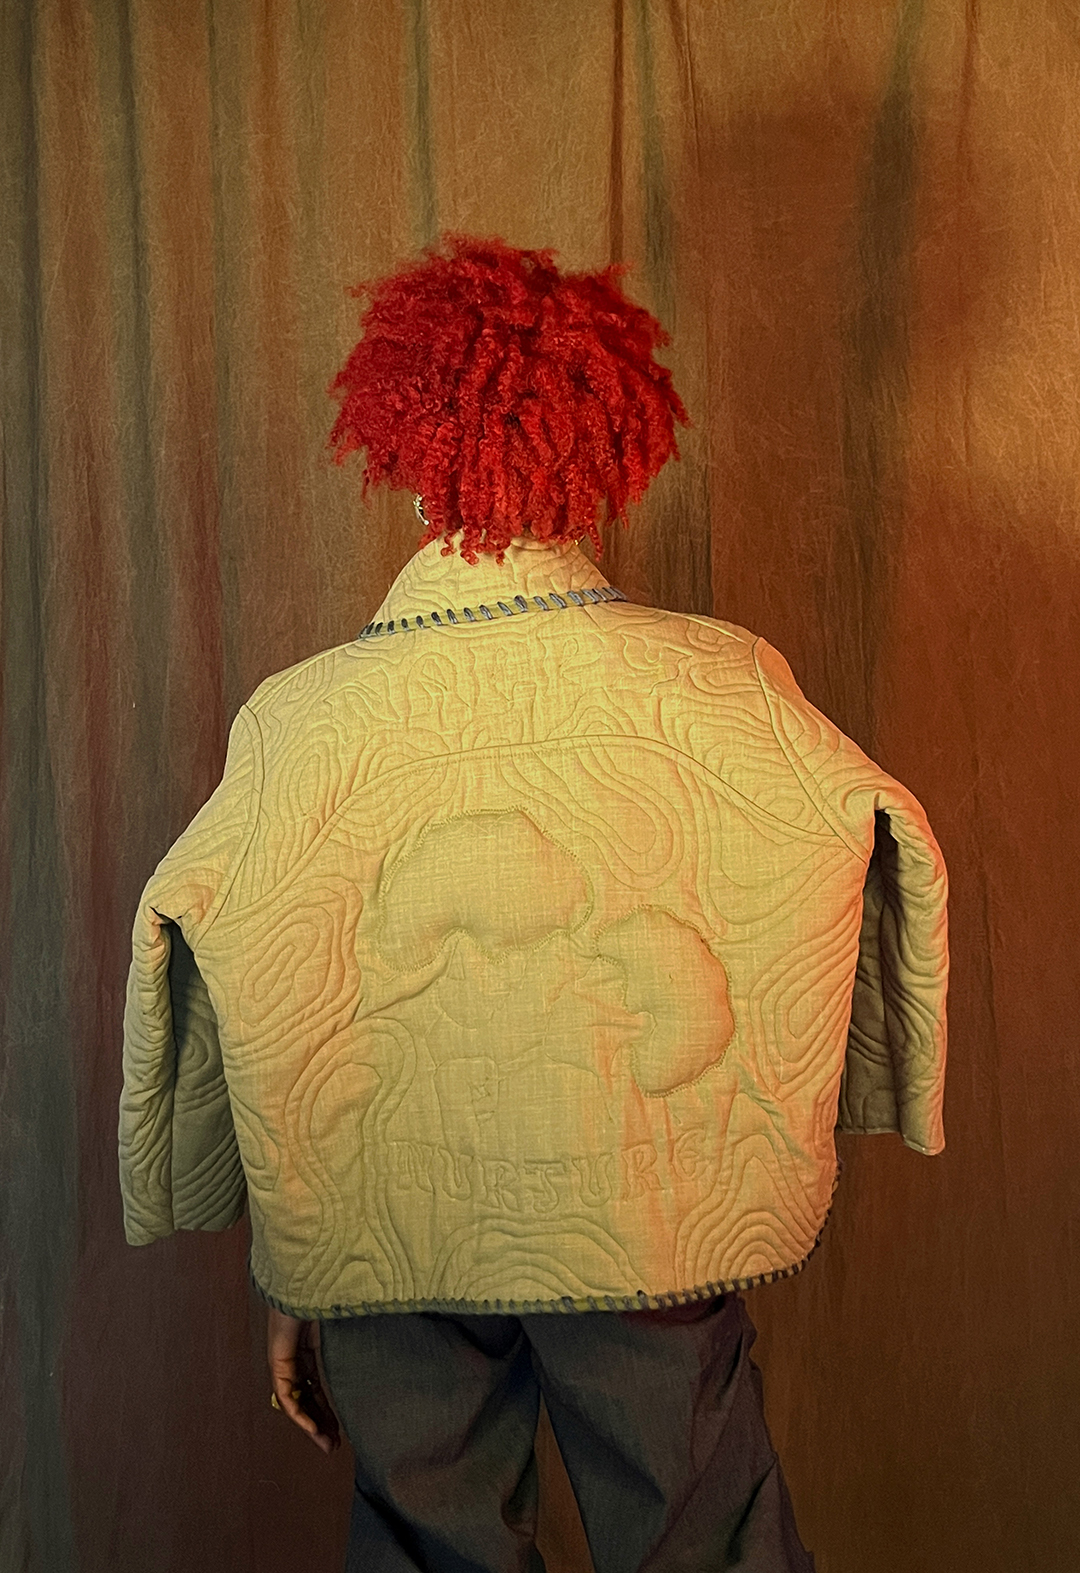 Back view of a model wearing a quilted jacket that shows the image of a mother and a young daughter with the words "Nappy" and "Nurture" surrounding them.